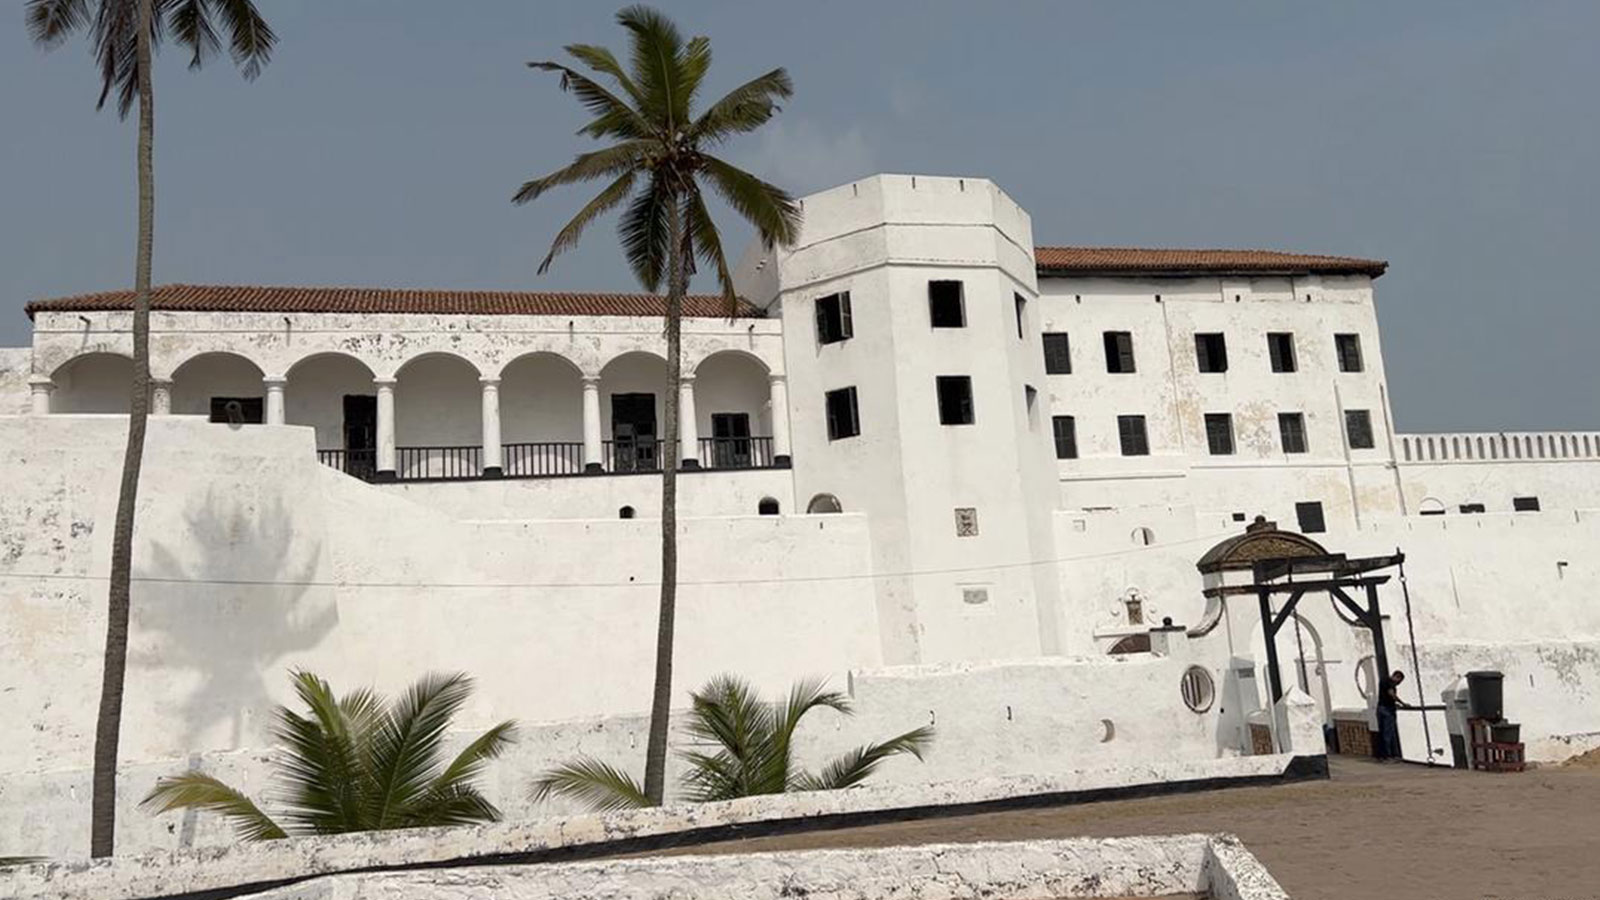 The Elmina Castle is the oldest European-built structure south of the Sahara